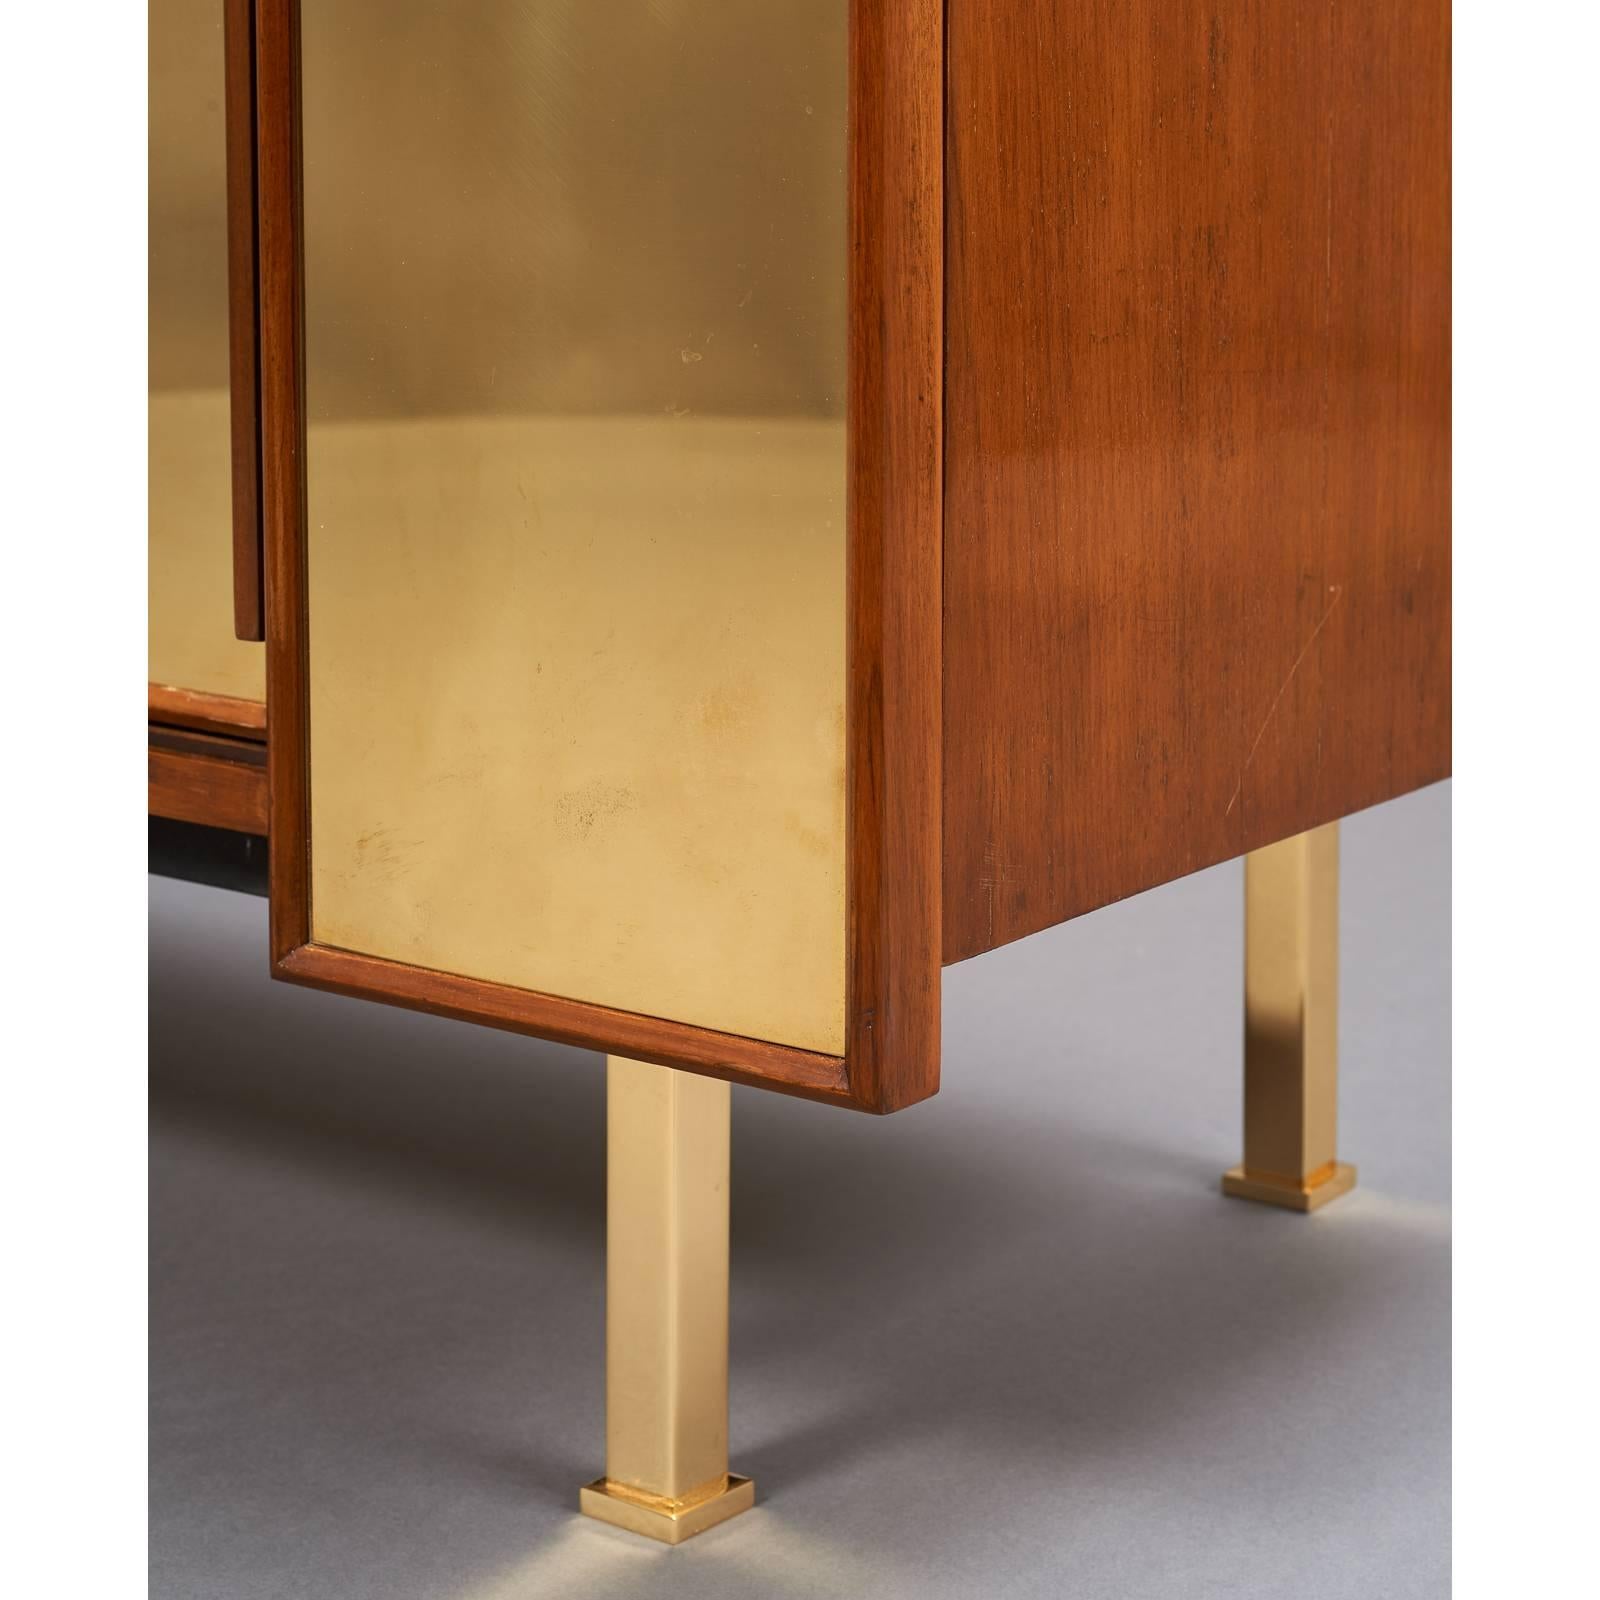 Late 20th Century Architectural Asymmetrical Cabinet in Reflective Polished Brass, France, 1970s